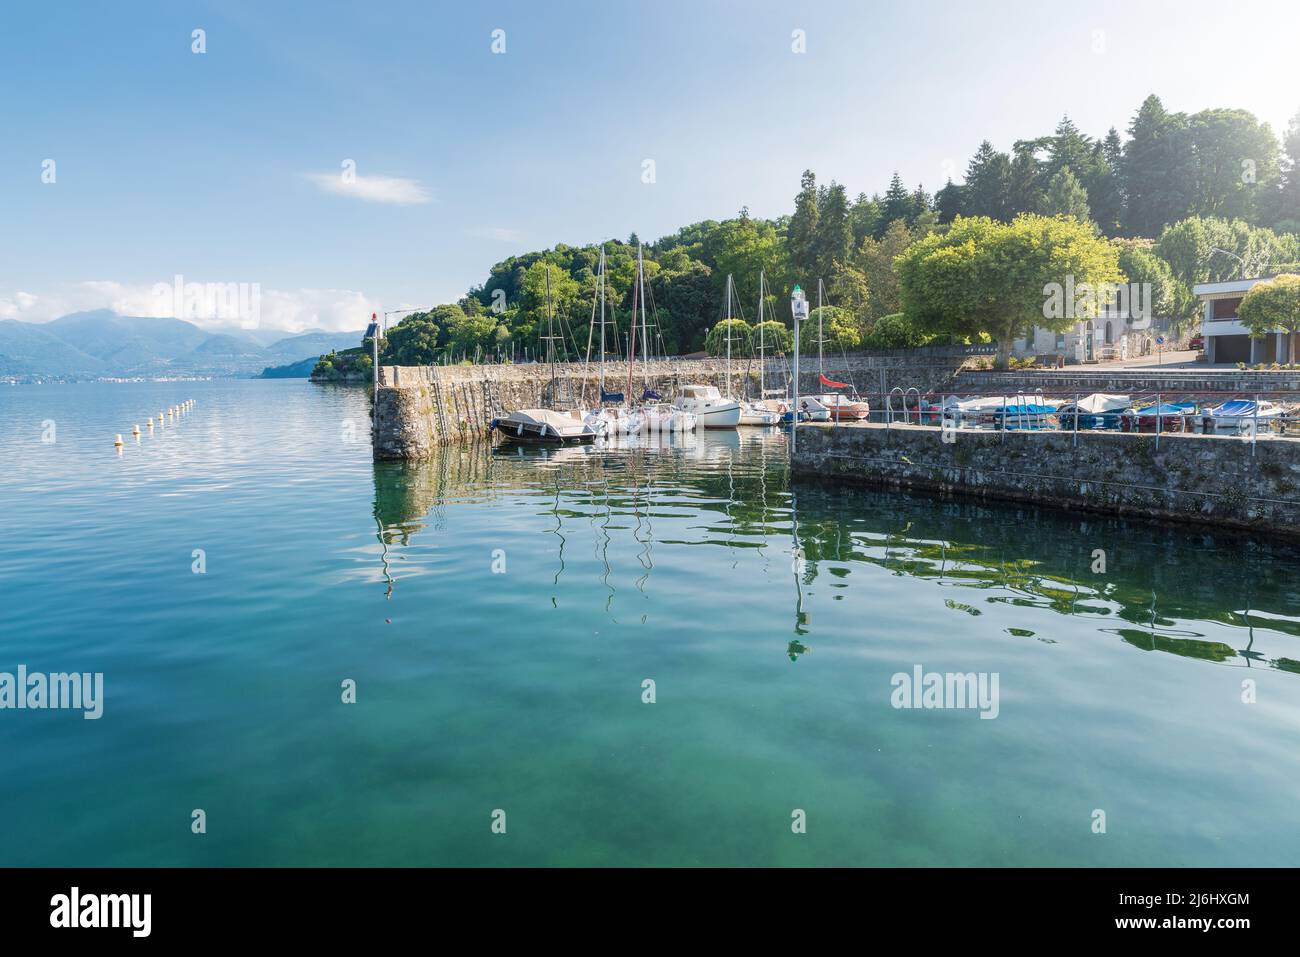 Typical small harbor on a large lake in northern Italy. Lake Maggiore at the lakeside of the town of Ispra with moored boats. Summer landscape Stock Photo